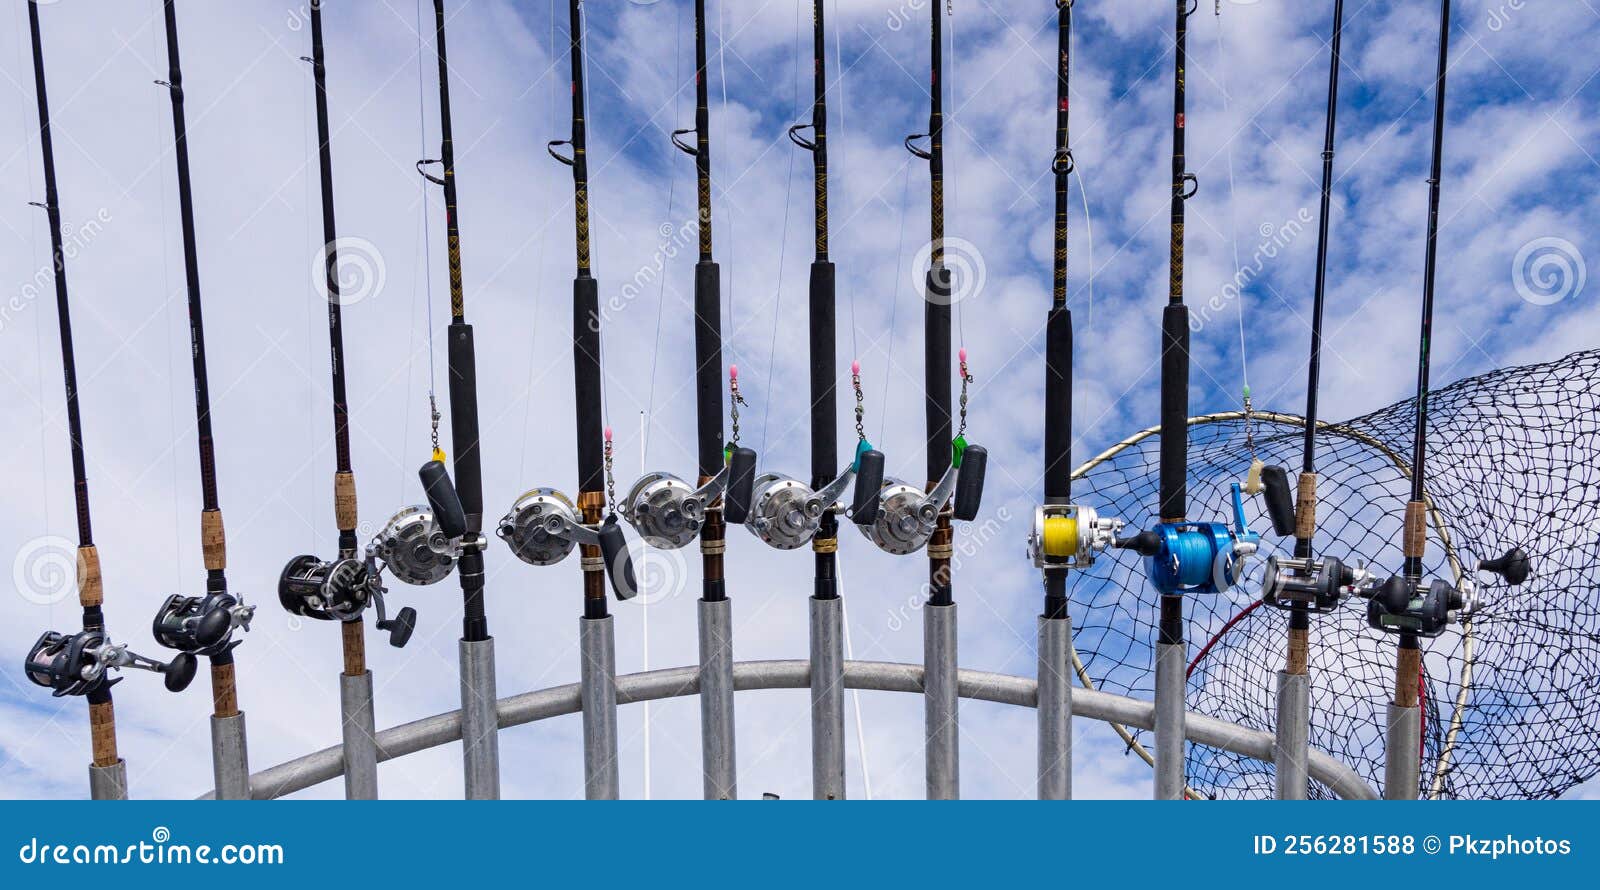 Rods, Reels, and a Big Net stock photo. Image of sound - 256281588